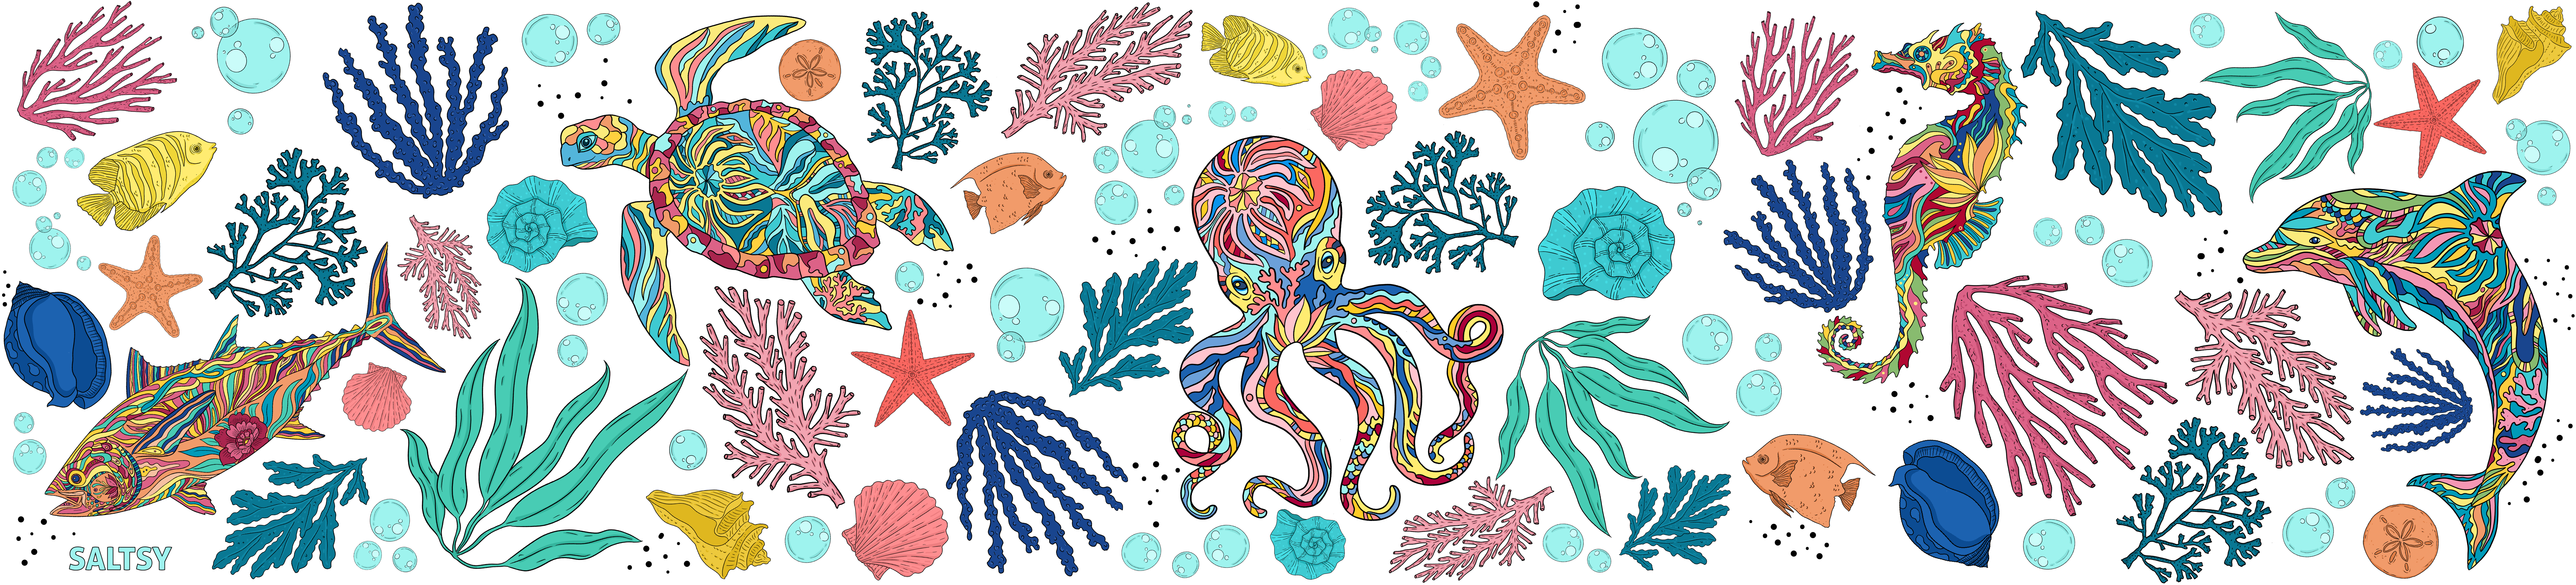 Ocean scene artwork by Saltsy featuring mandala ocean creatures in a colorful sea of plants and animals